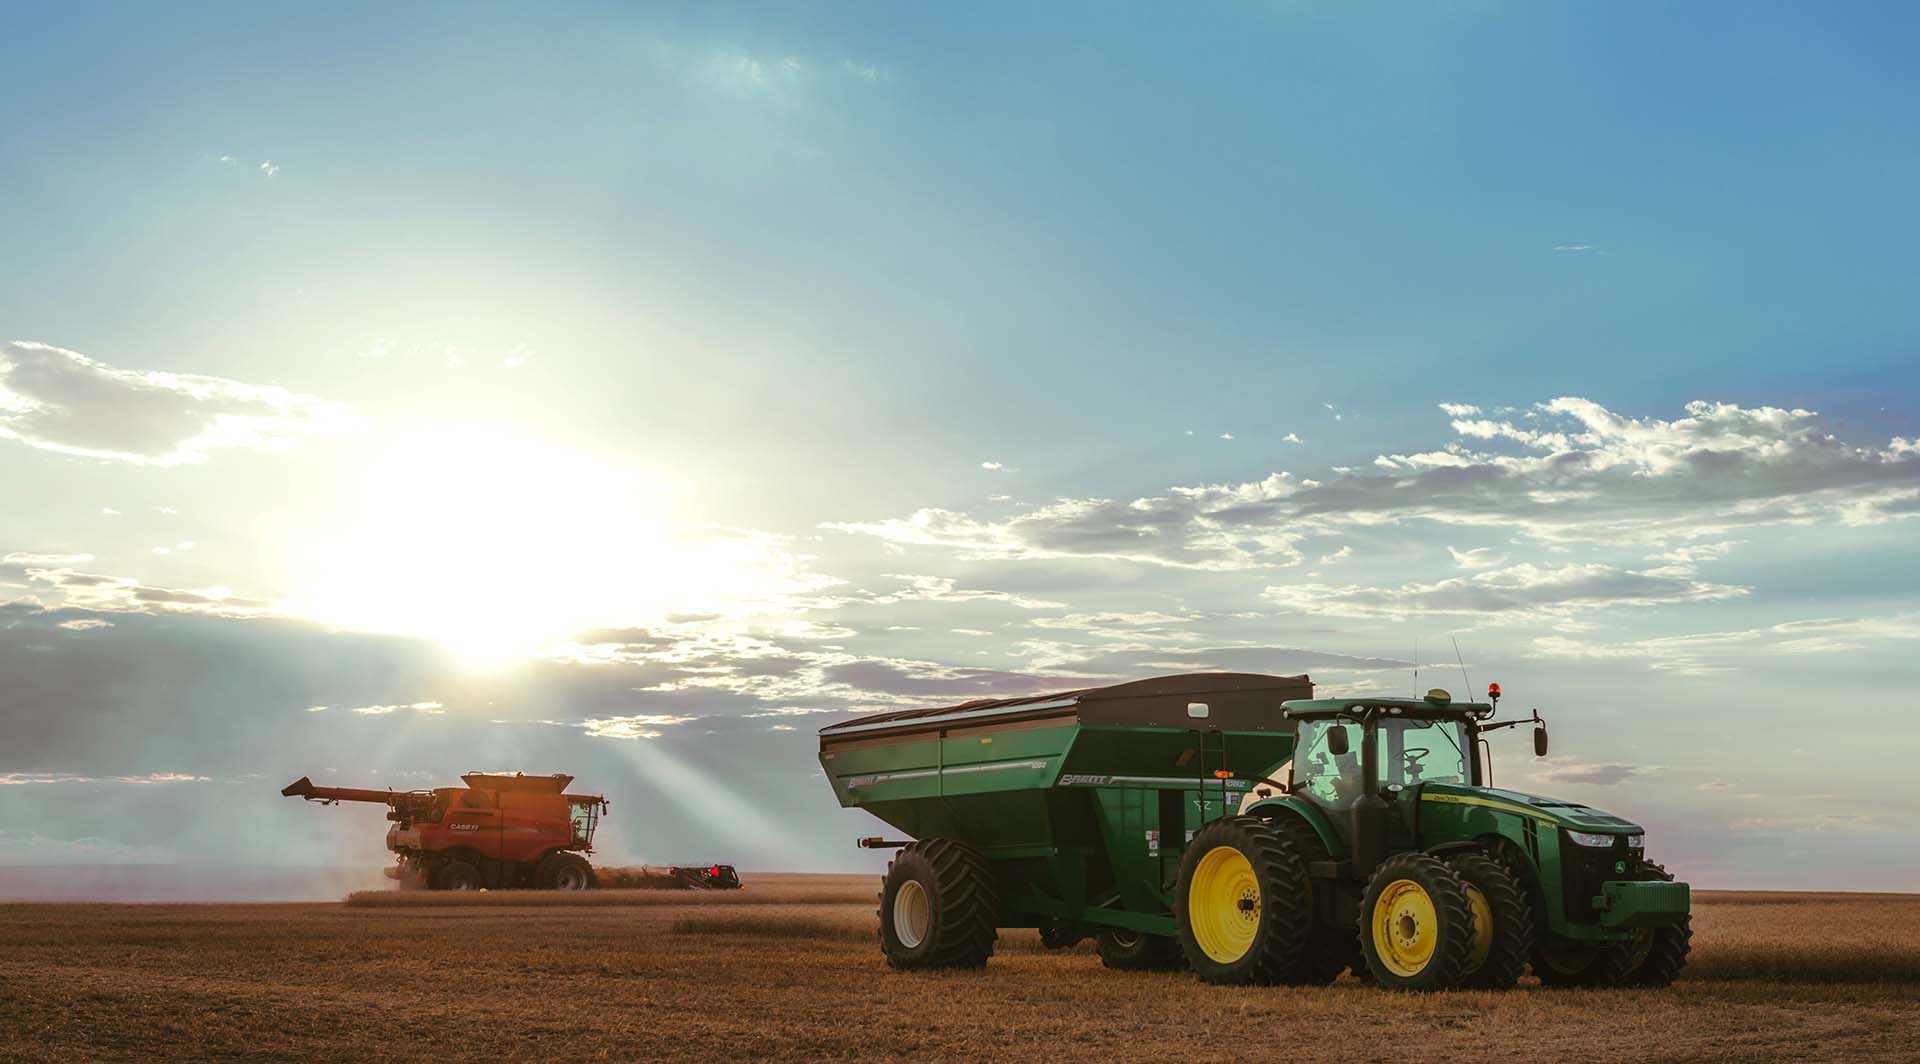 Near sunset, a red combine harvests wheat while a tractor and grain cart wait to get a load in Nebraska.